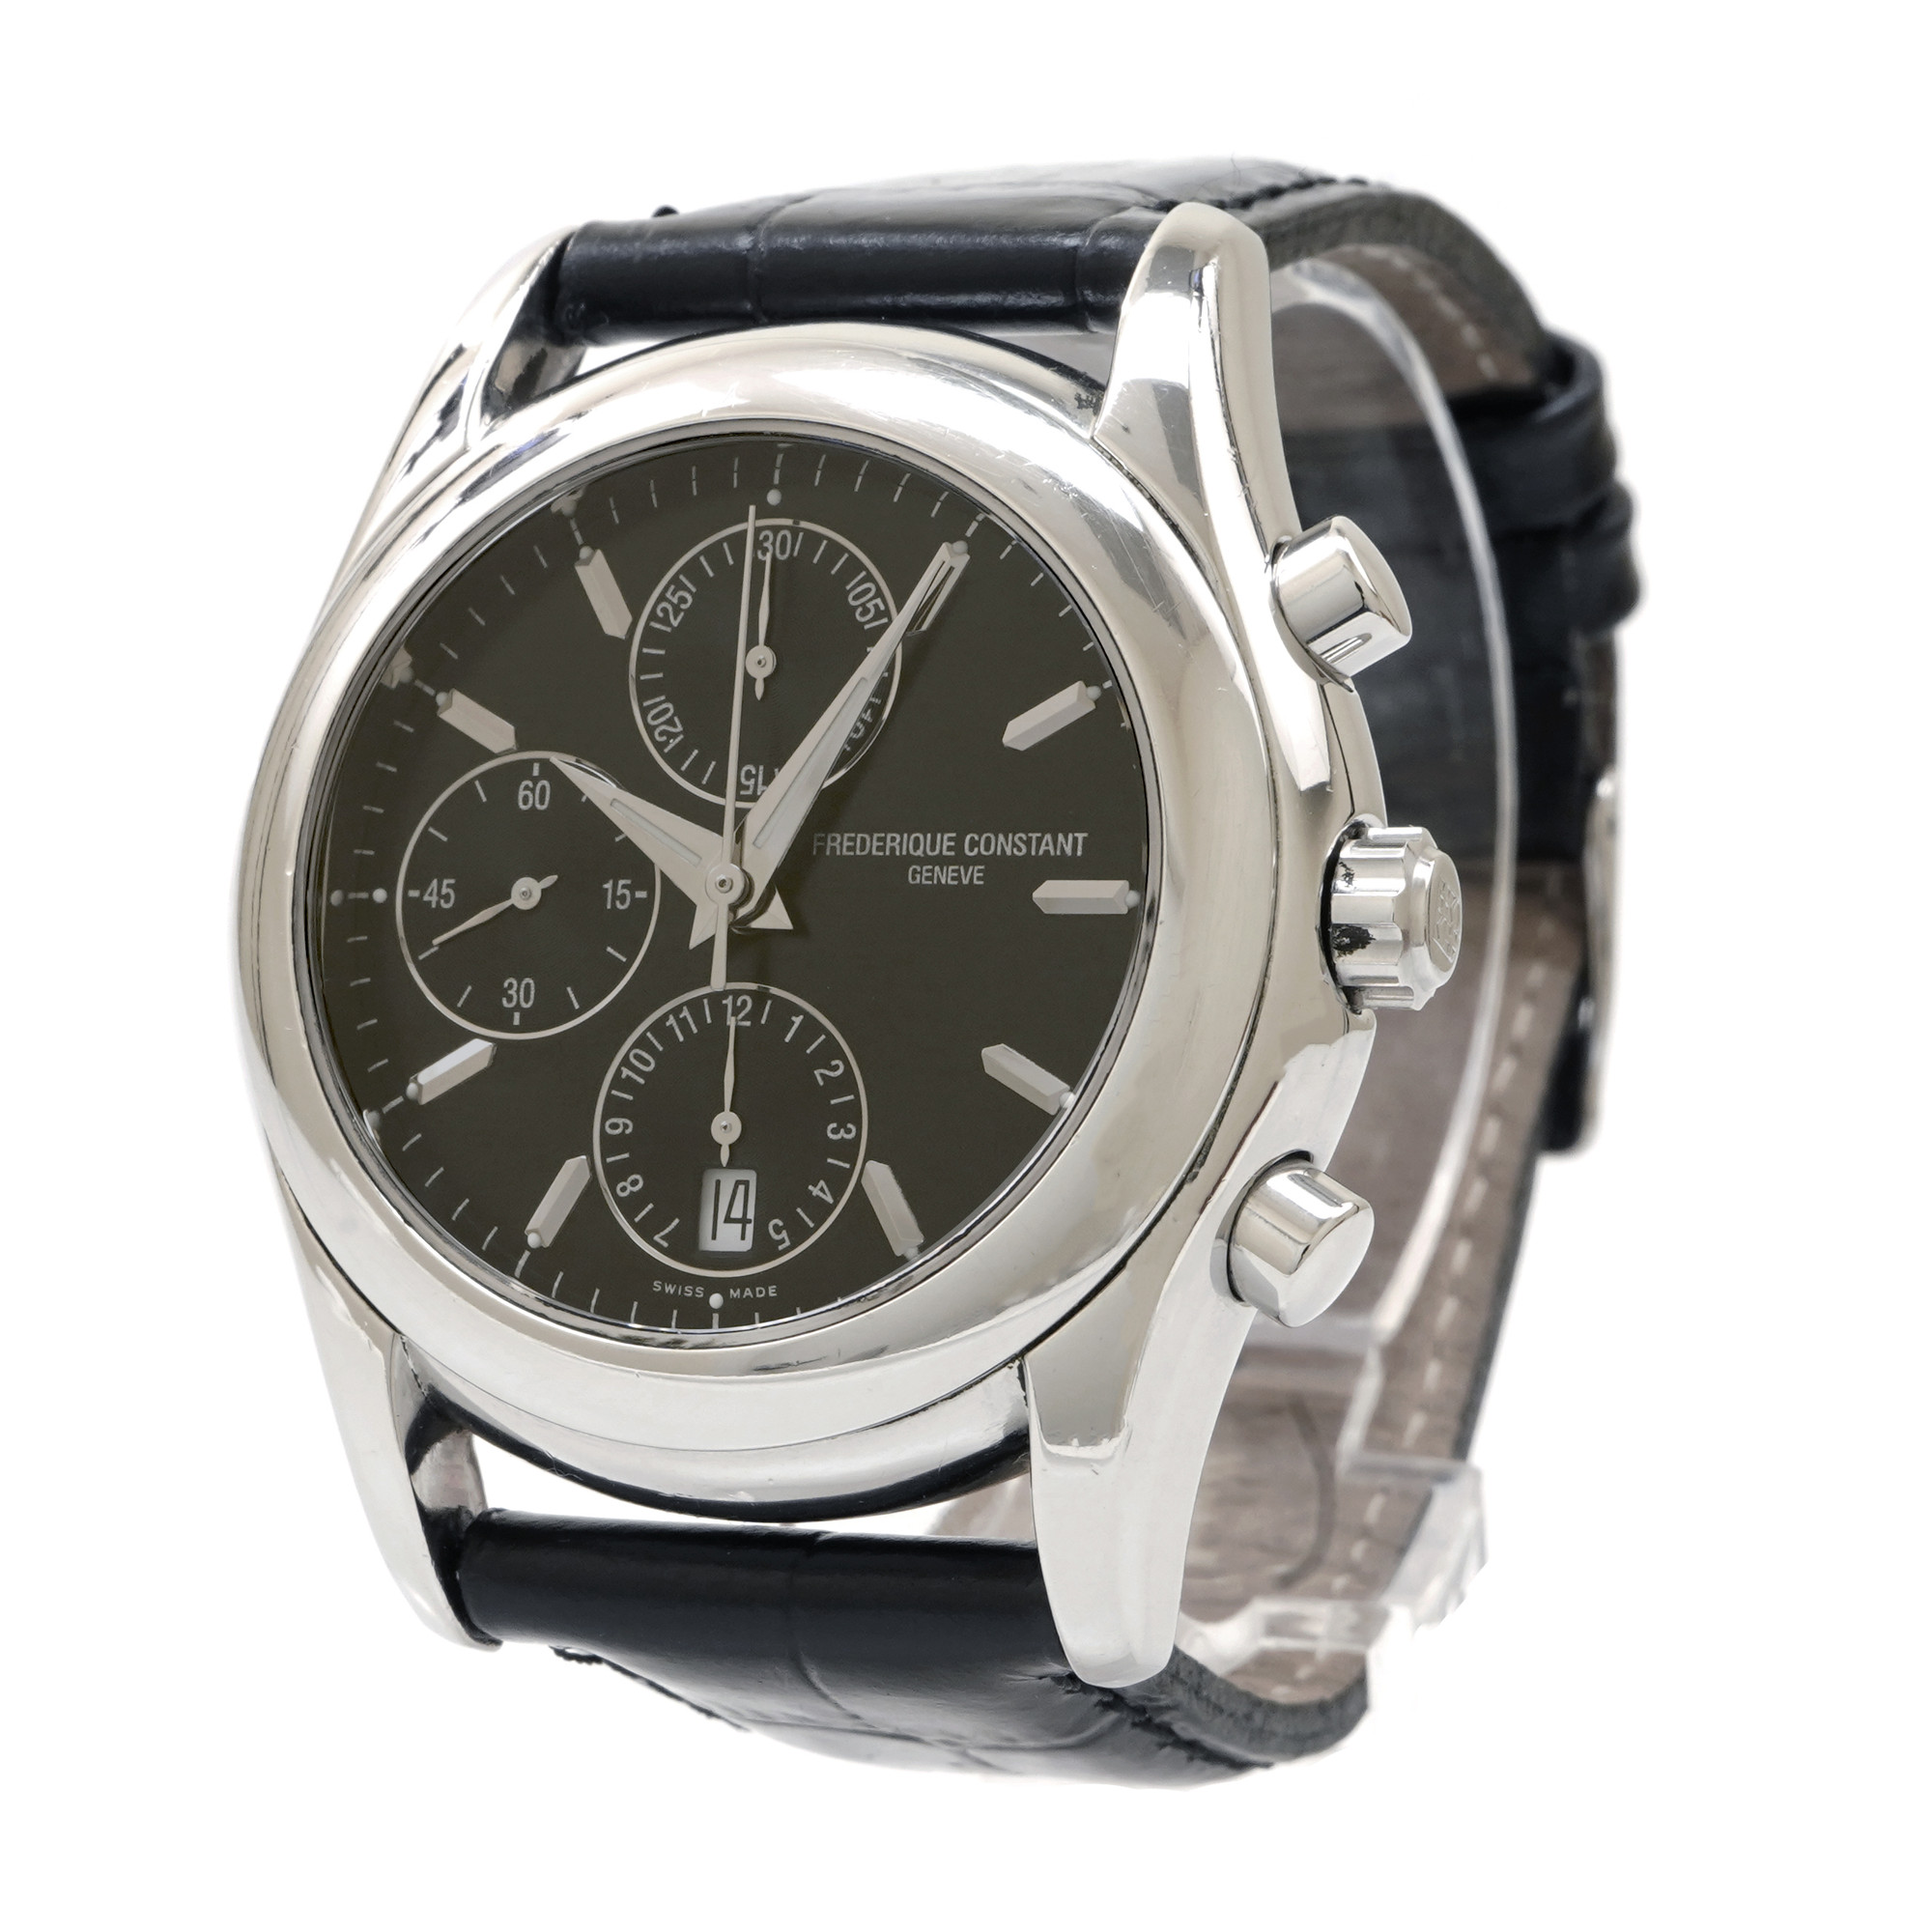 Frederique Constant Runabout Chronograph FC-392X5B4/5/6 - Inventory 3477